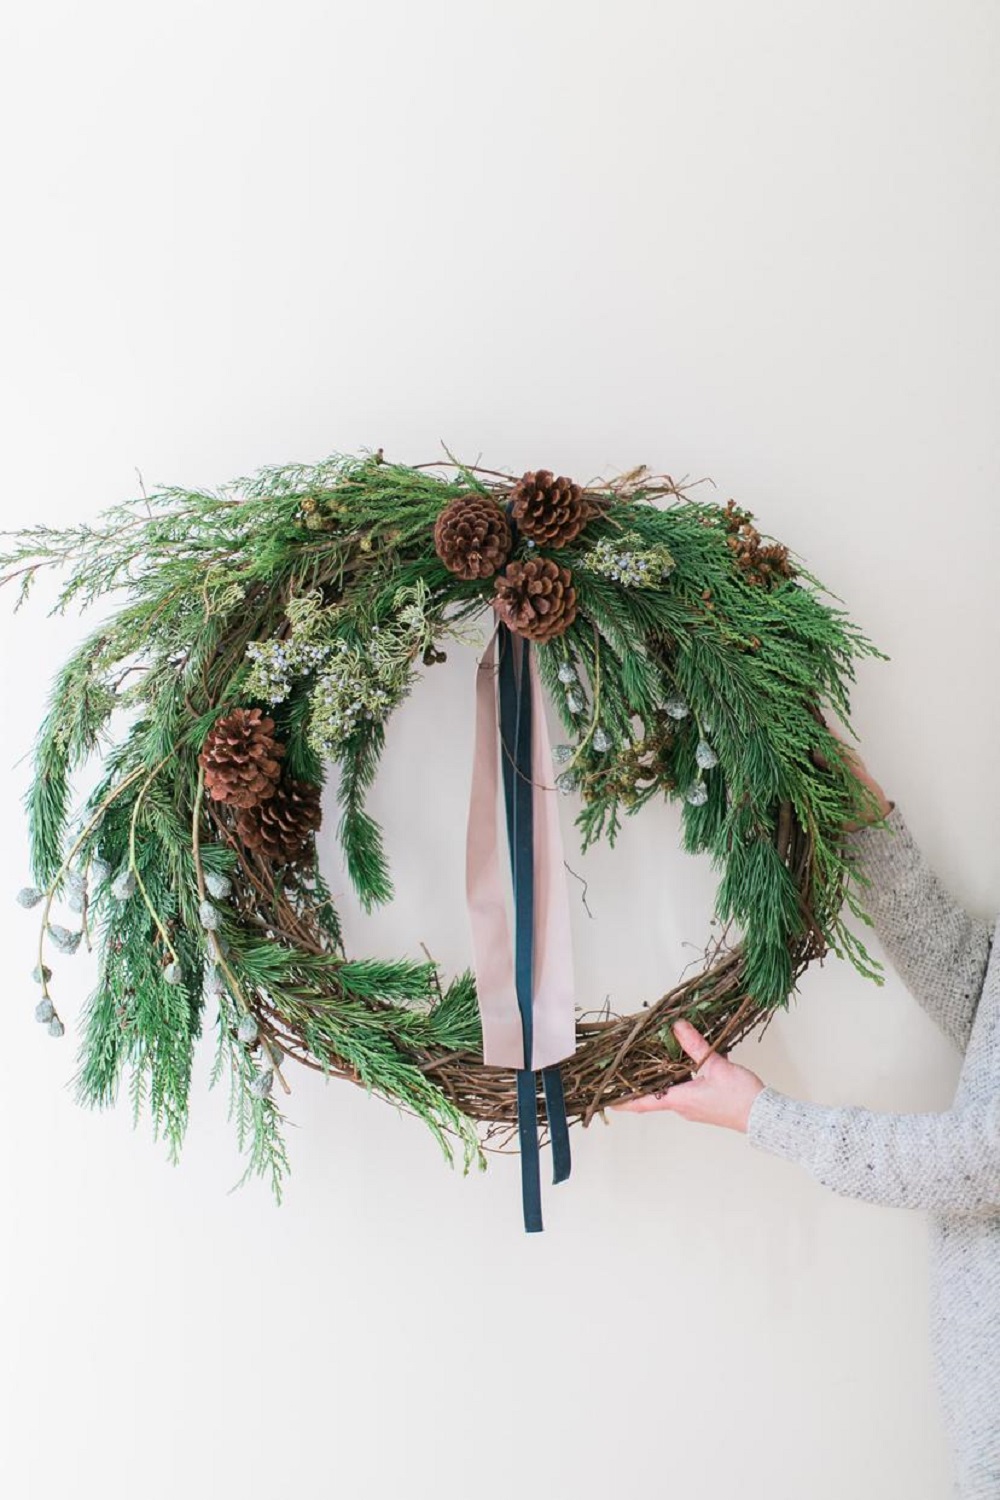 16 Fun and Festive DIY Christmas Wreaths Anyone Can Make Even If You Are Not Crafty